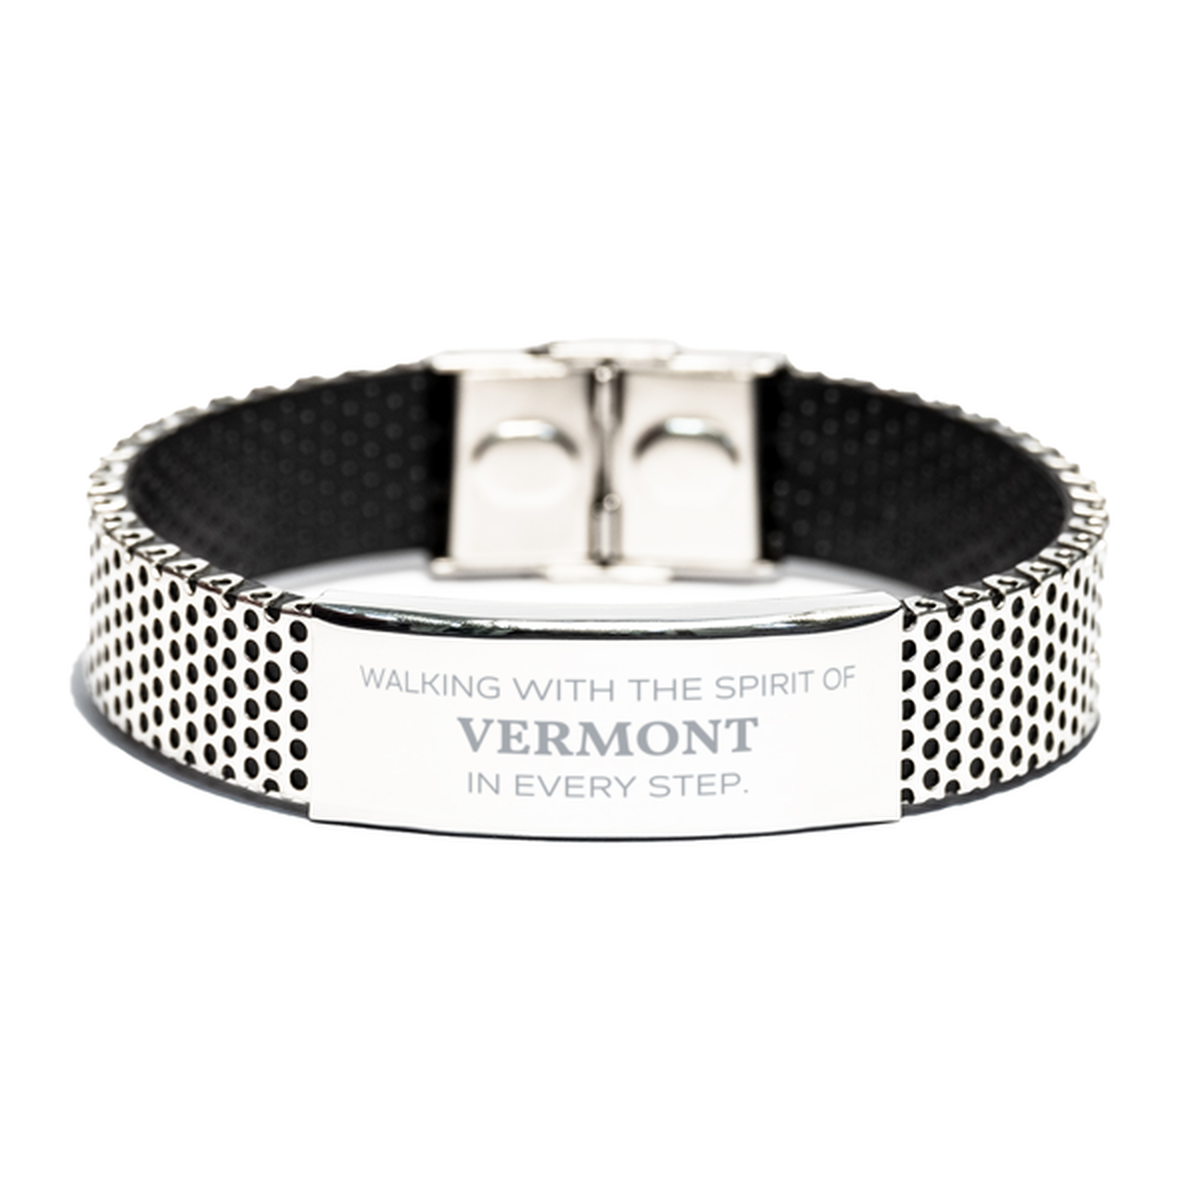 Vermont Gifts, Walking with the spirit, Love Vermont Birthday Christmas Stainless Steel Bracelet For Vermont People, Men, Women, Friends